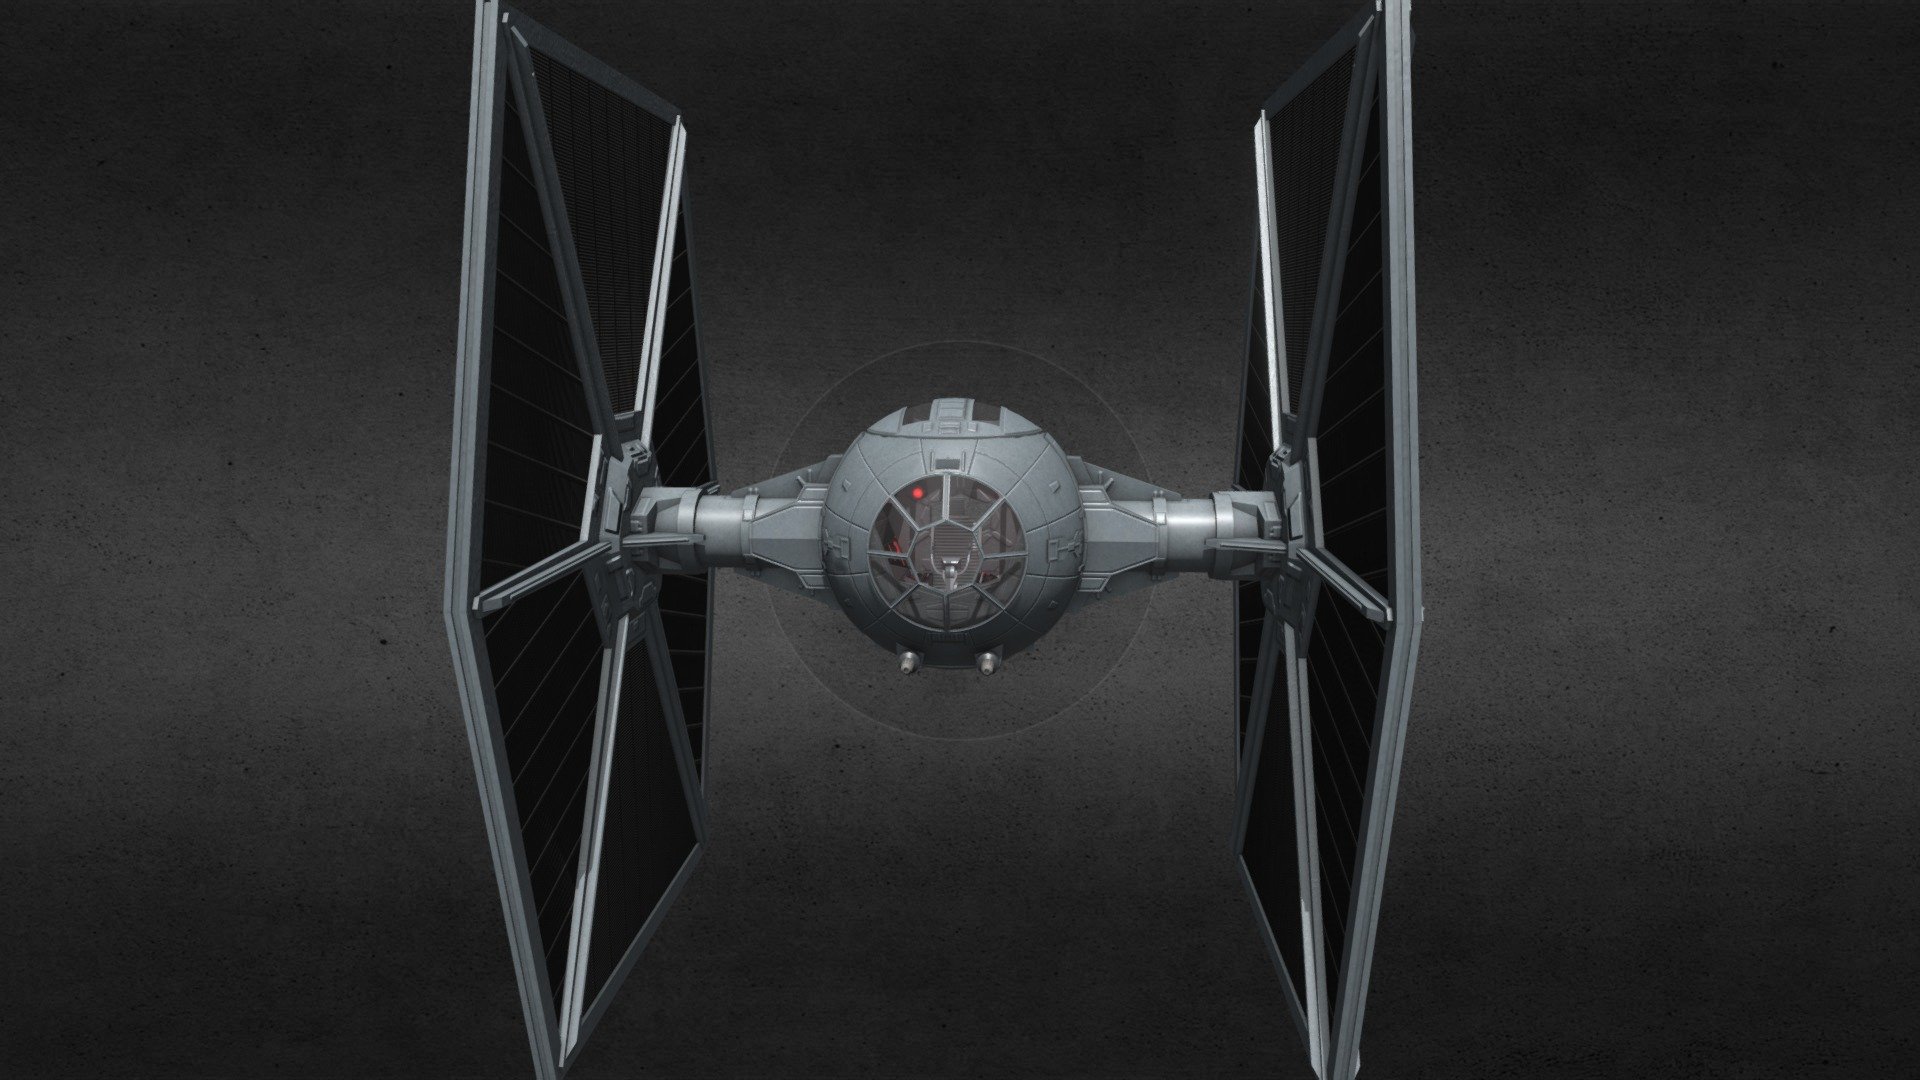 Model of the imperial standard issue TIE Fighter. This will eventually be a flyable vehicle in gmod.

The TIE/LN starfighter,[26] or TIE/line starfighter, simply known as the TIE Fighter or T/F,[27] was the standard Imperial starfighter seen in massive numbers throughout most of the Galactic Civil War and onward. Colloquially, Rebel and New Republic pilots referred to the craft as &ldquo;eyeballs.